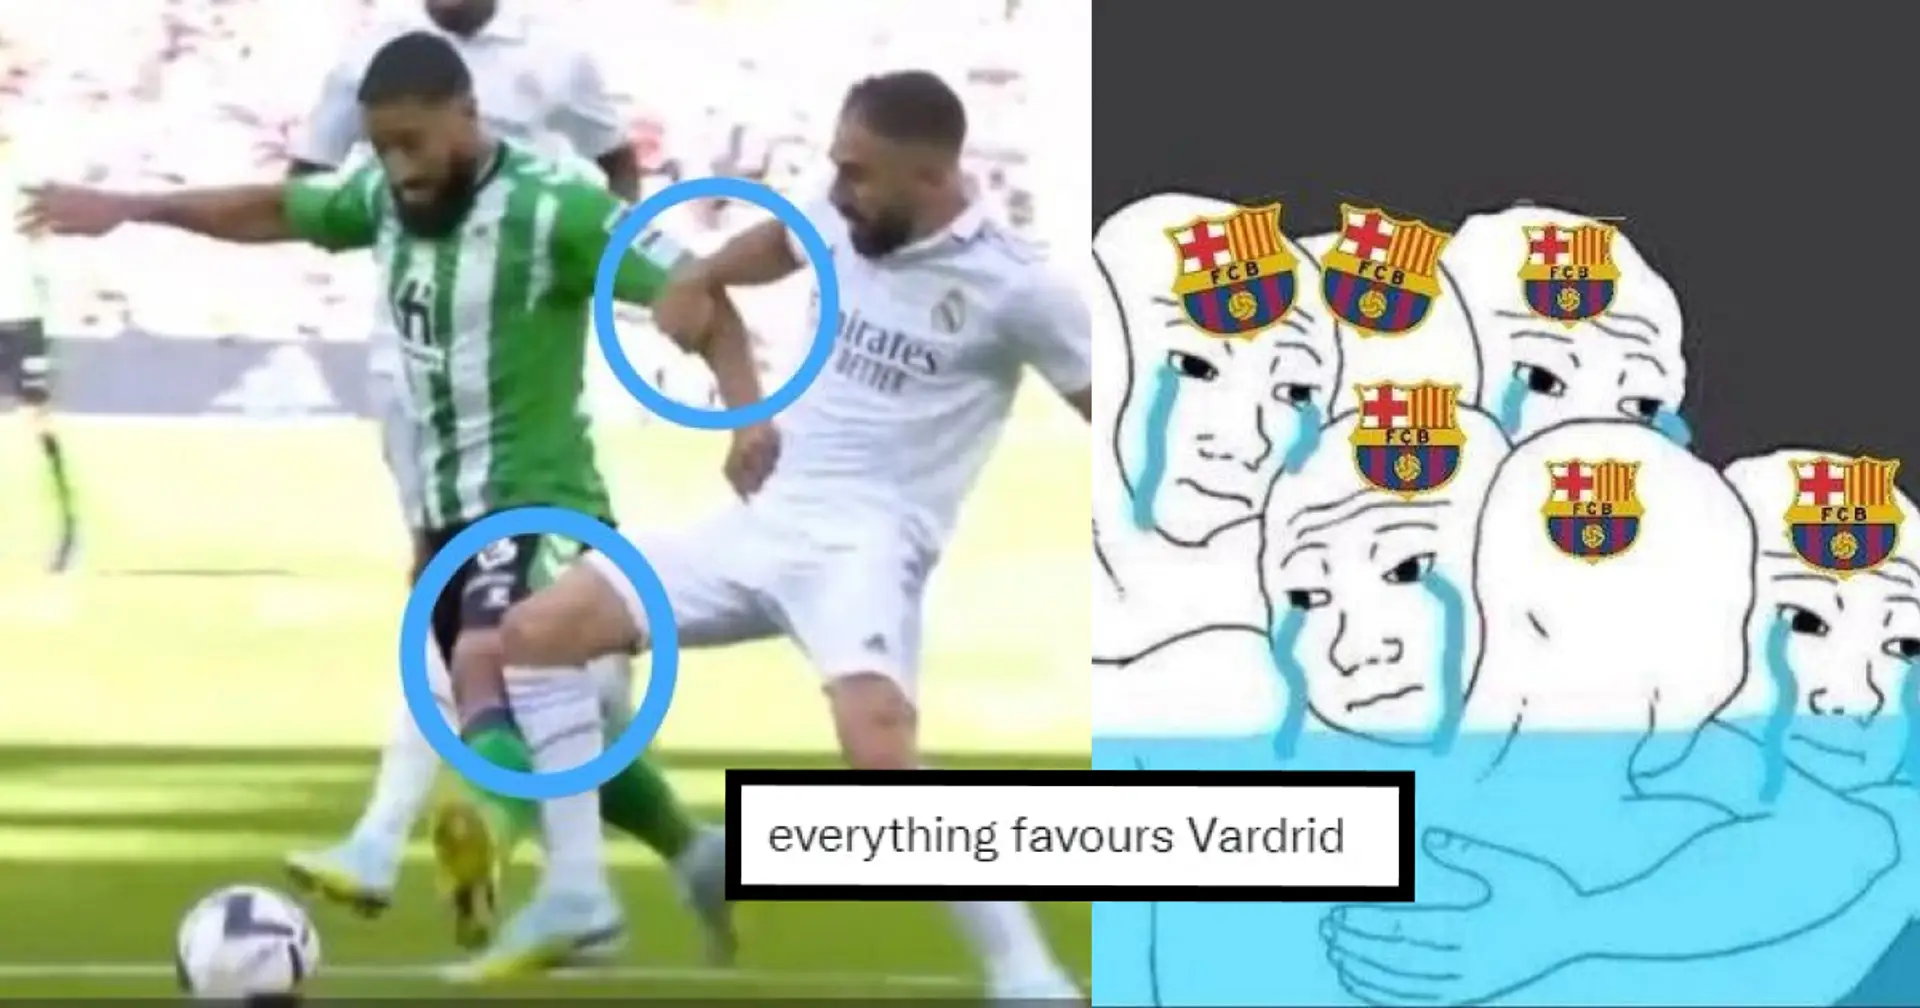 'Thank you, Vardrid, and thank you Mr Perez's corruption' - Barca fans complain about officiating in Betis game